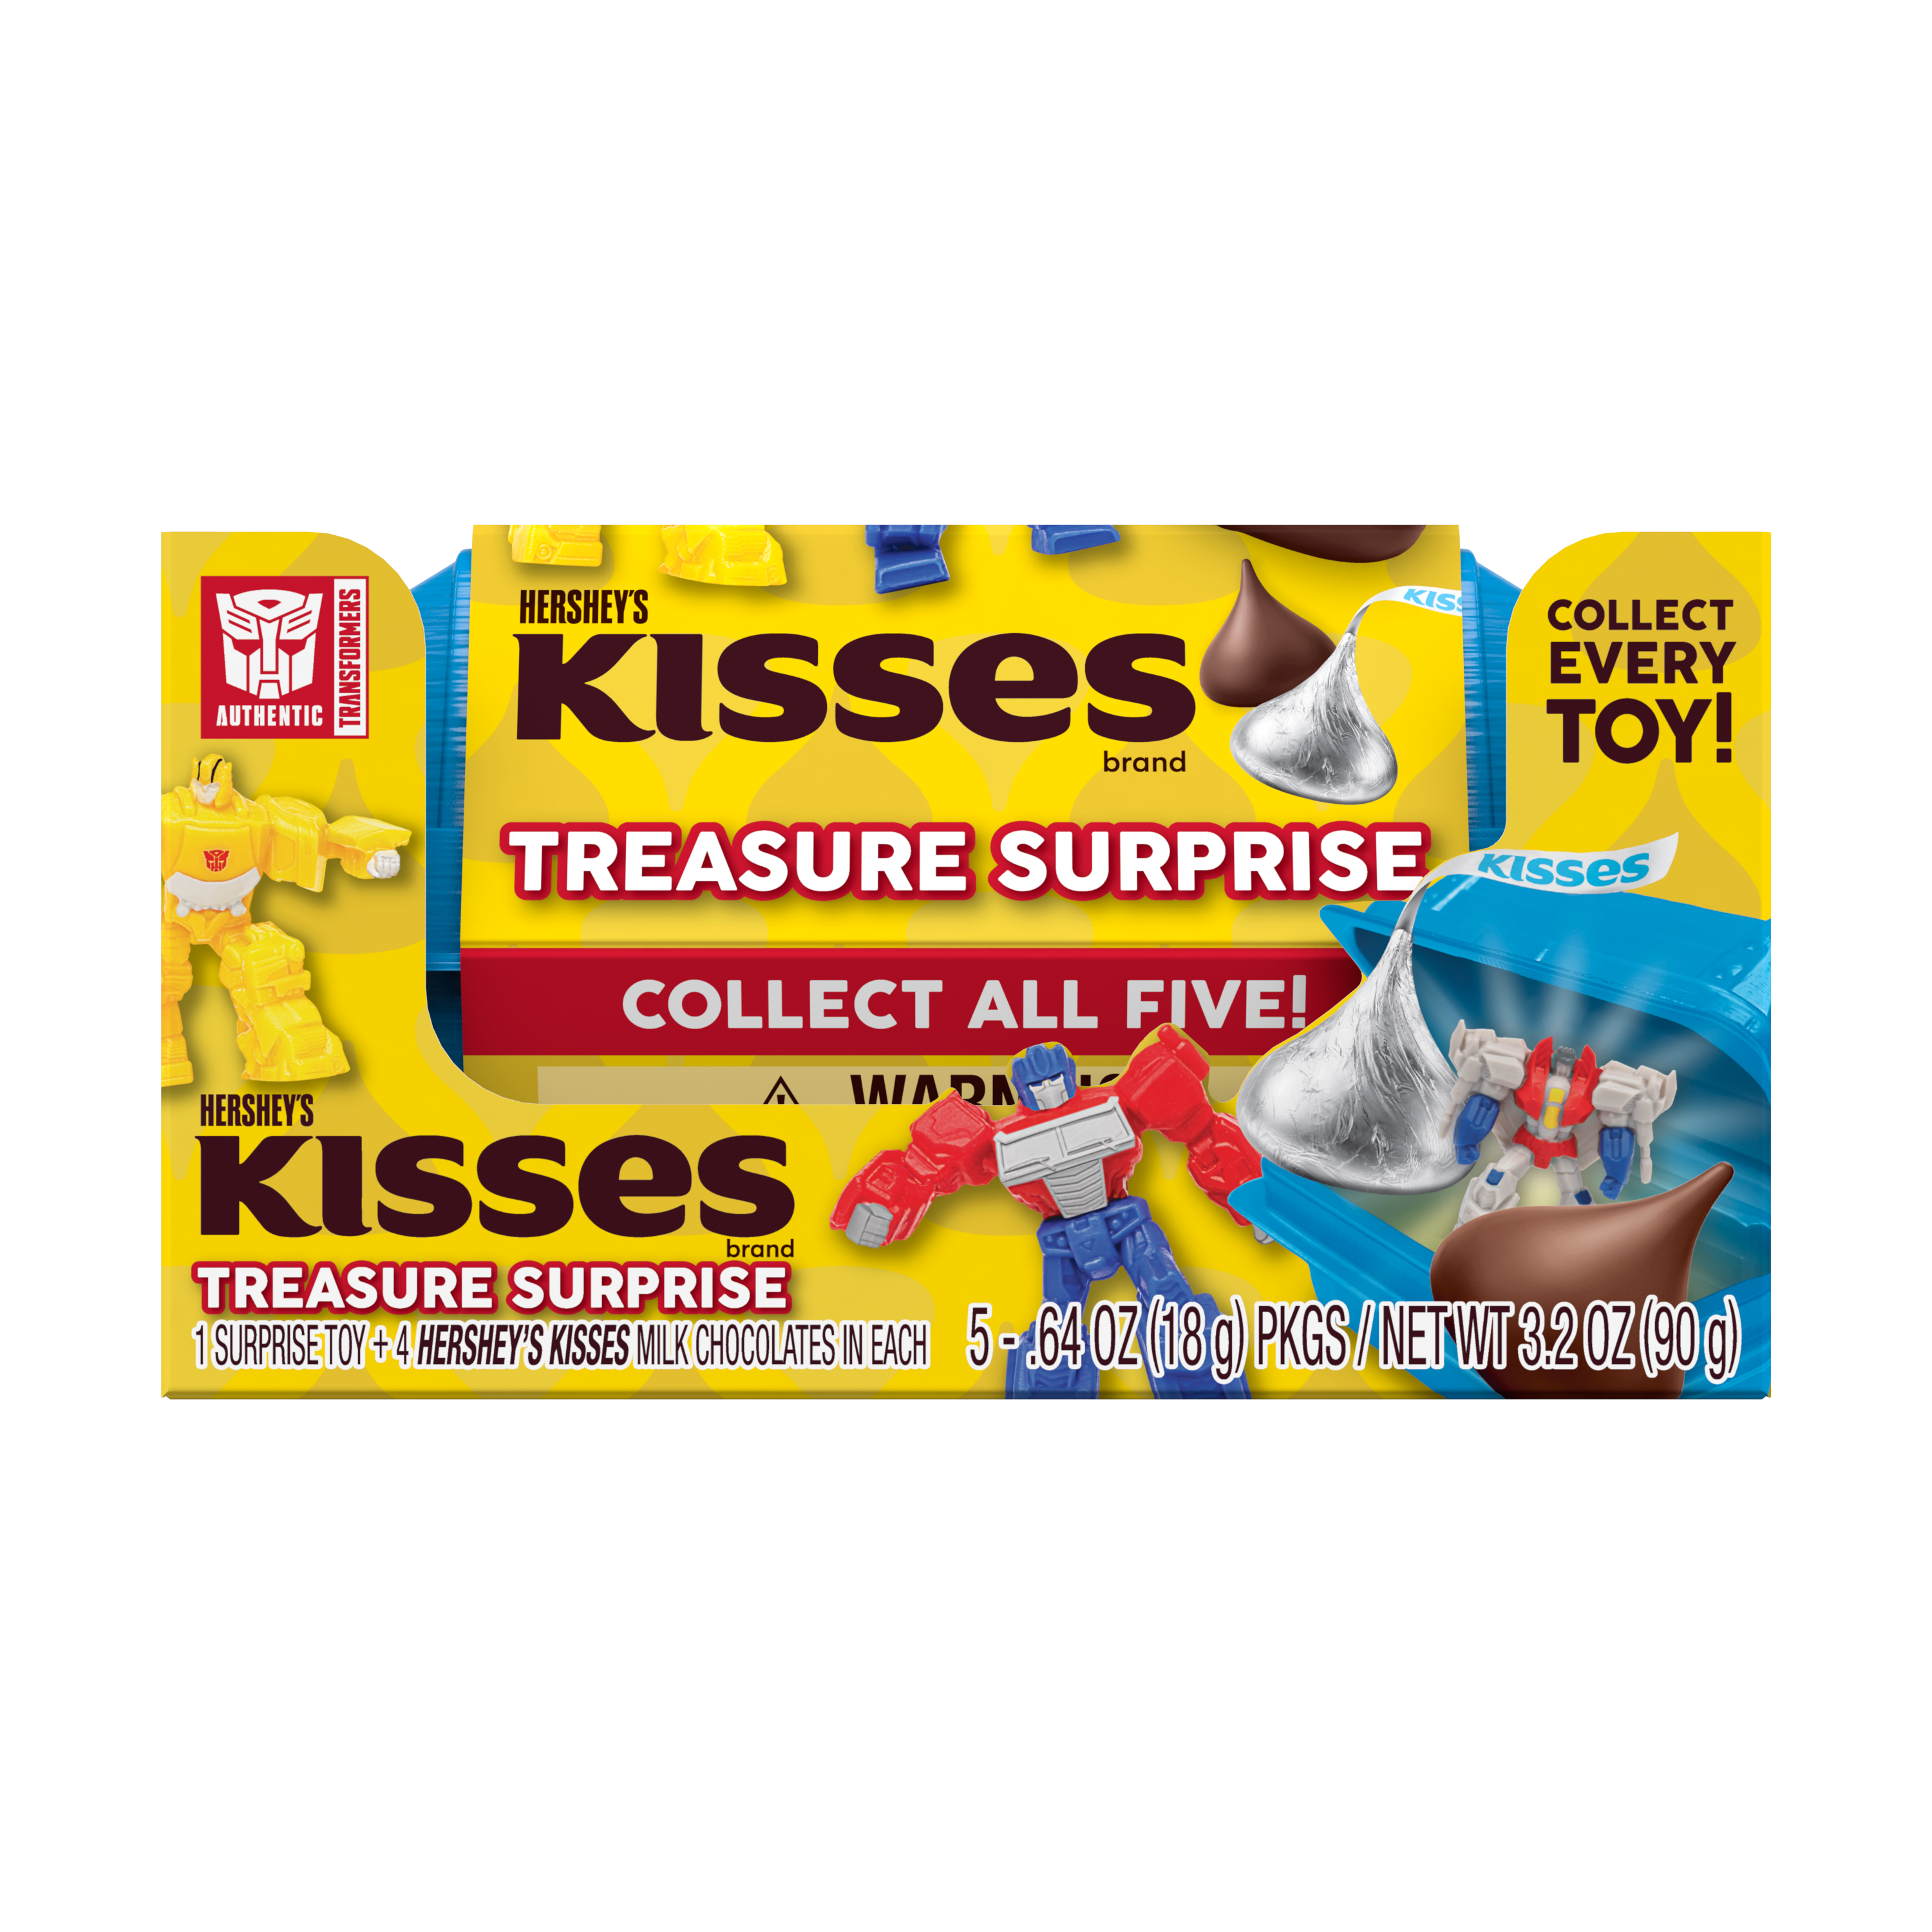 HERSHEY'S KISSES Transformers Milk Chocolate Treasure Surprise, 3.2 oz box, 5 pack - Front of Package